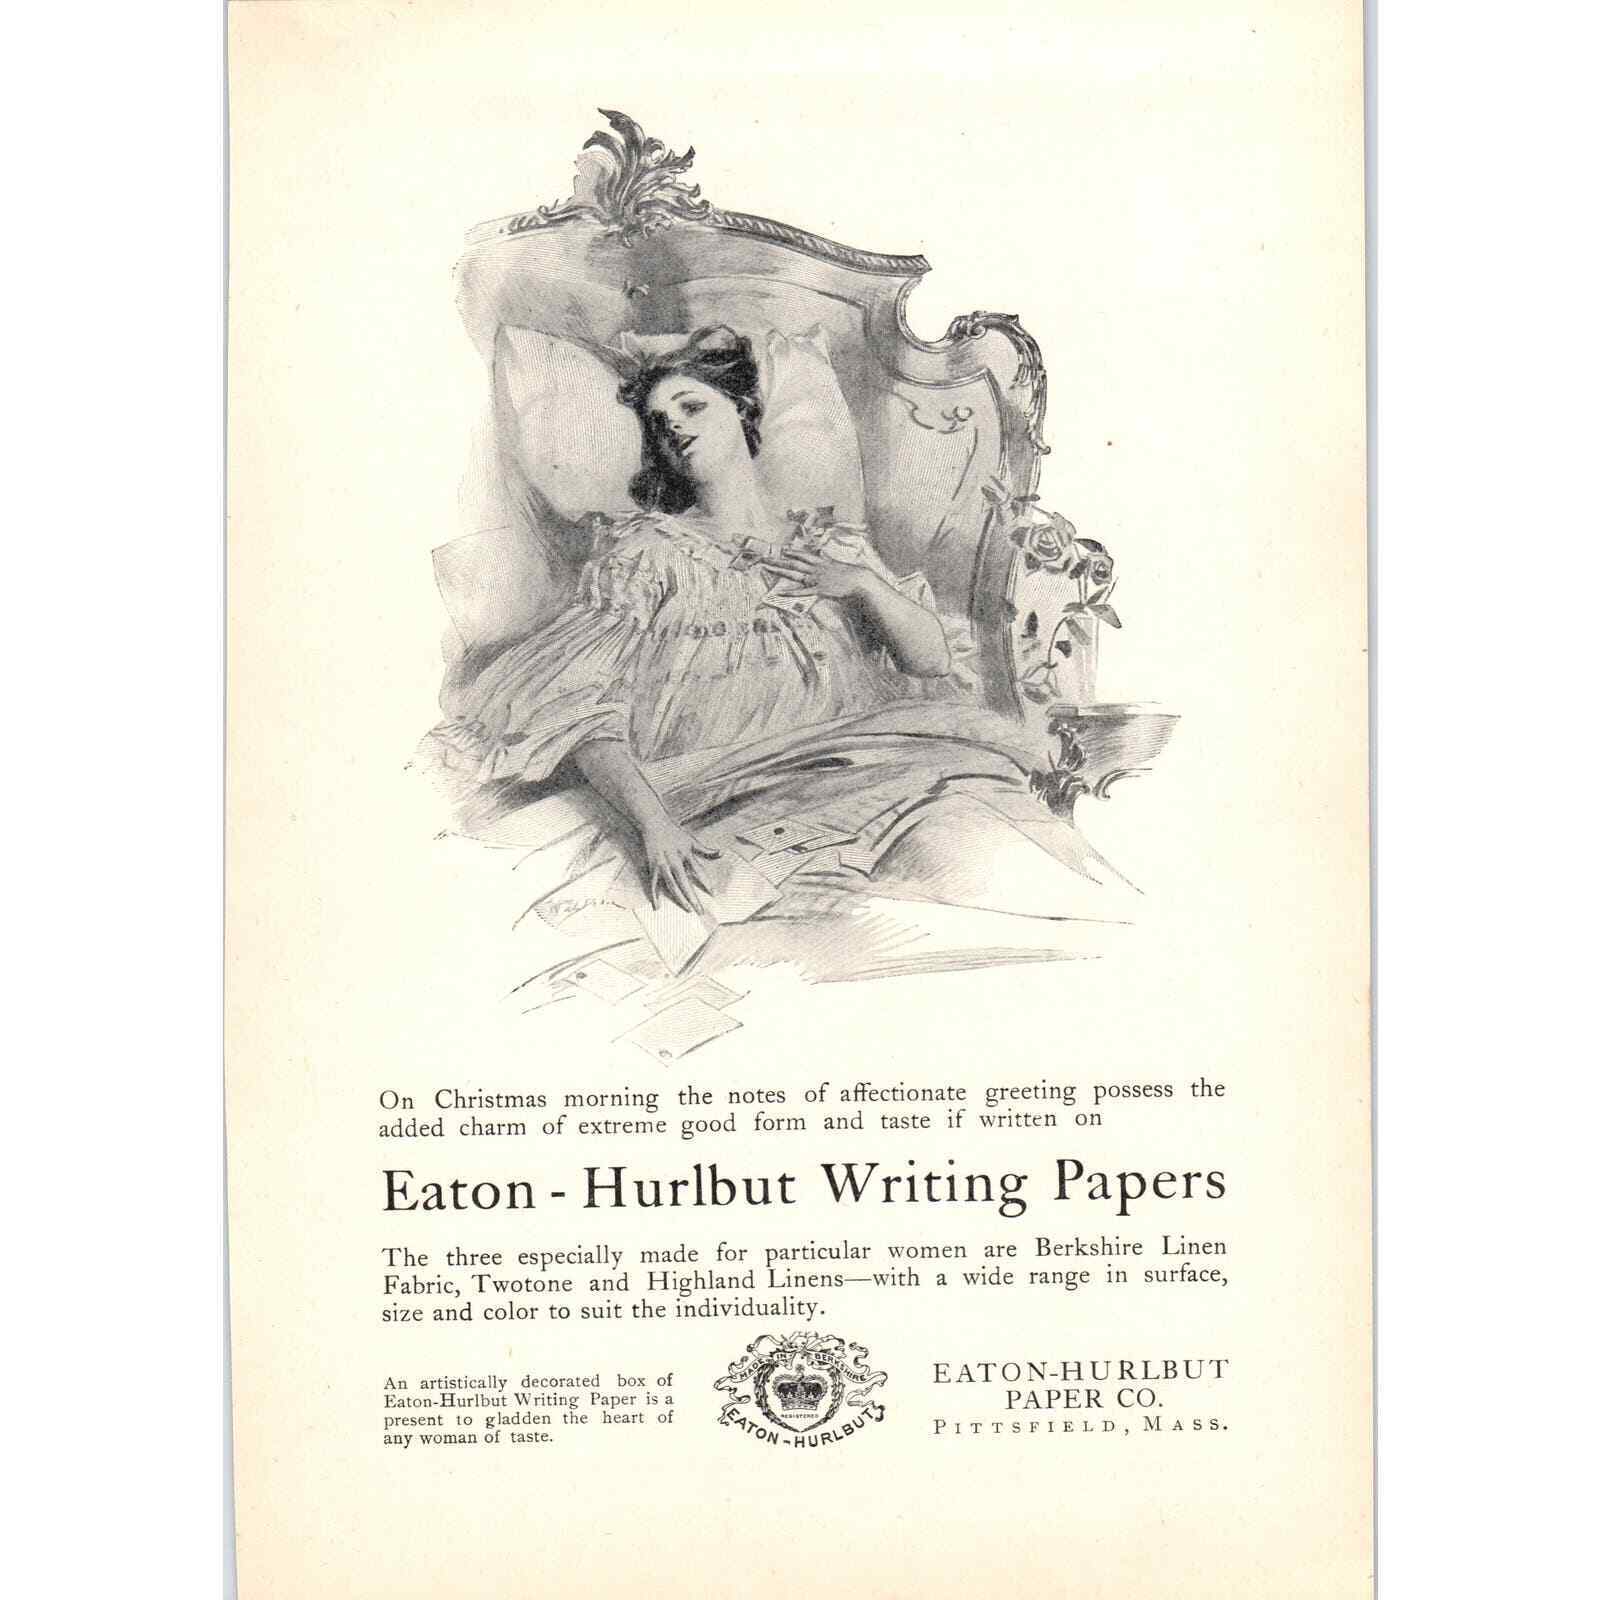 Writing Papers Lady Eaton-Hurlbut Paper Co Pittsfield MA c1905 Victorian Ad D13